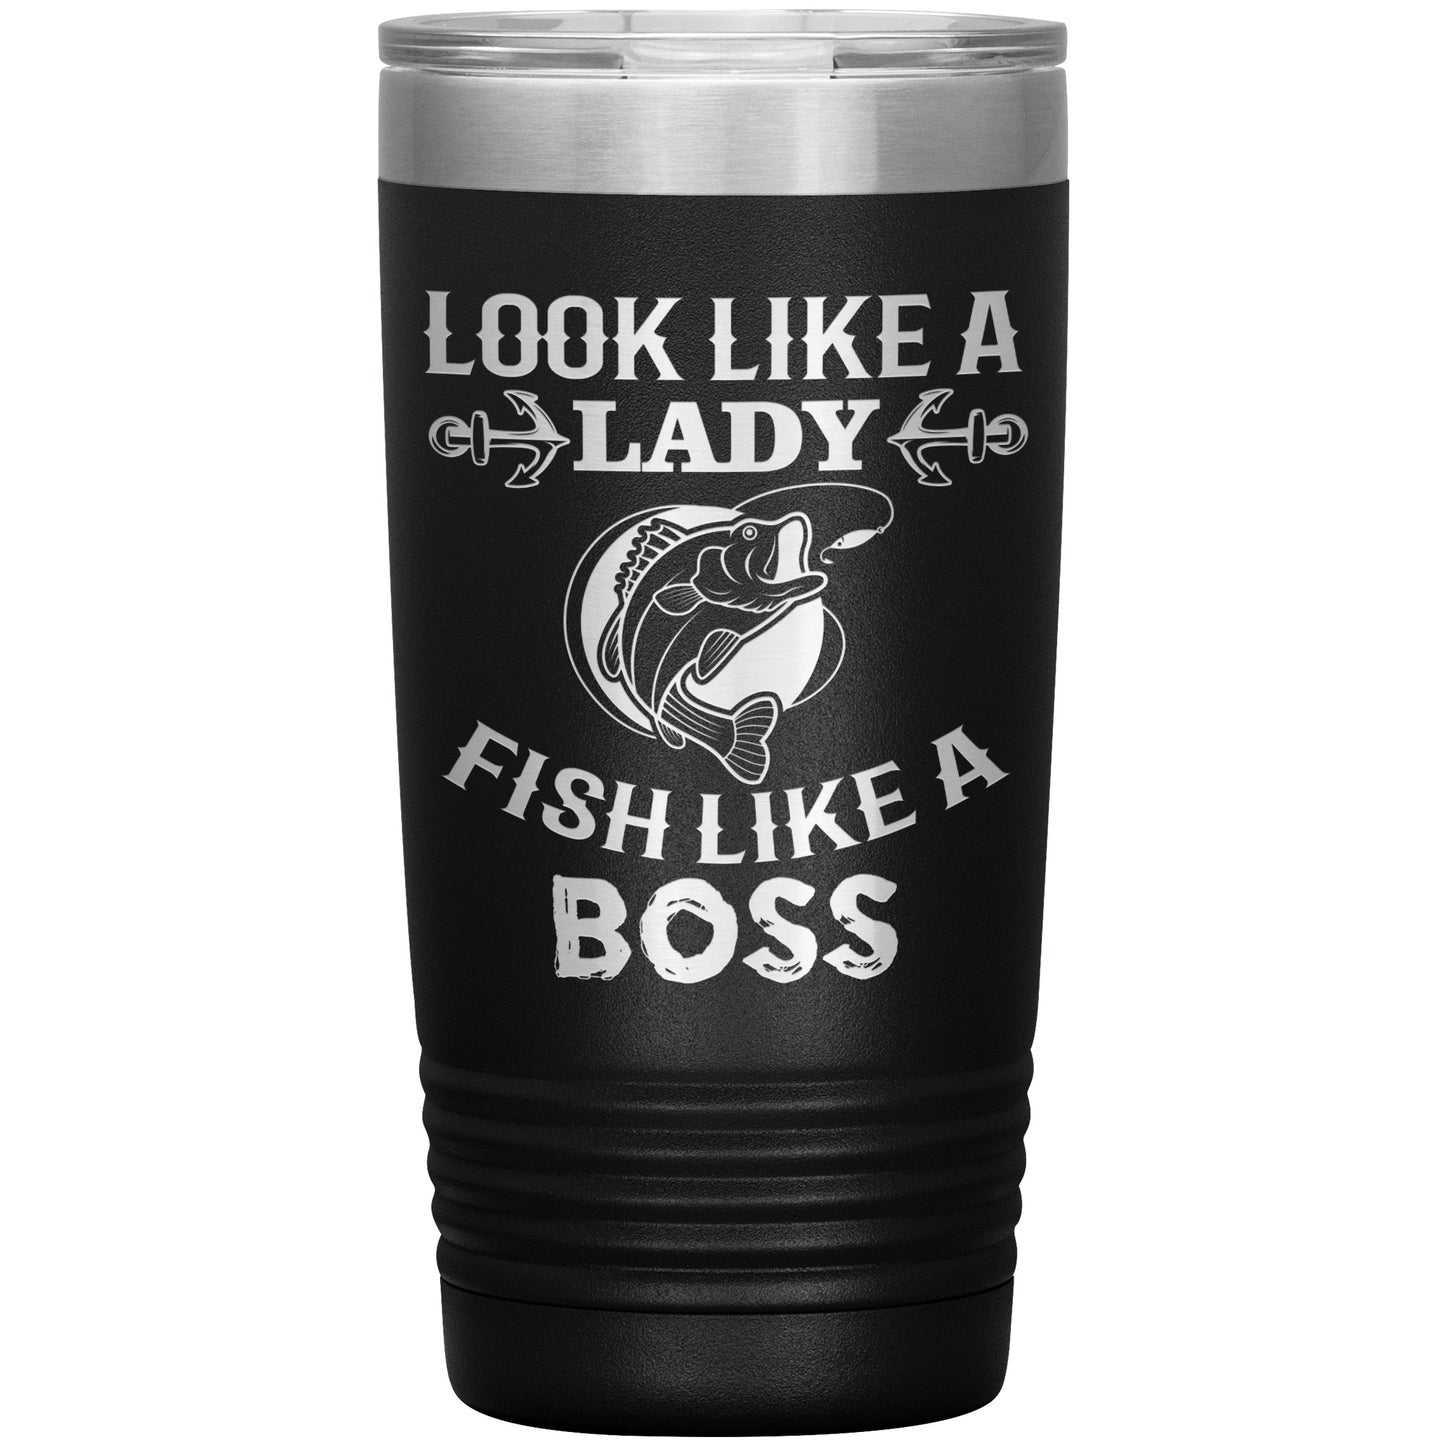 A Look Like a Lady, Fish Like a Boss - Laser Etched Tumbler - 20oz with a black print displaying the text "look like a lady fish like a boss" and an image of a fish and fishing rod.